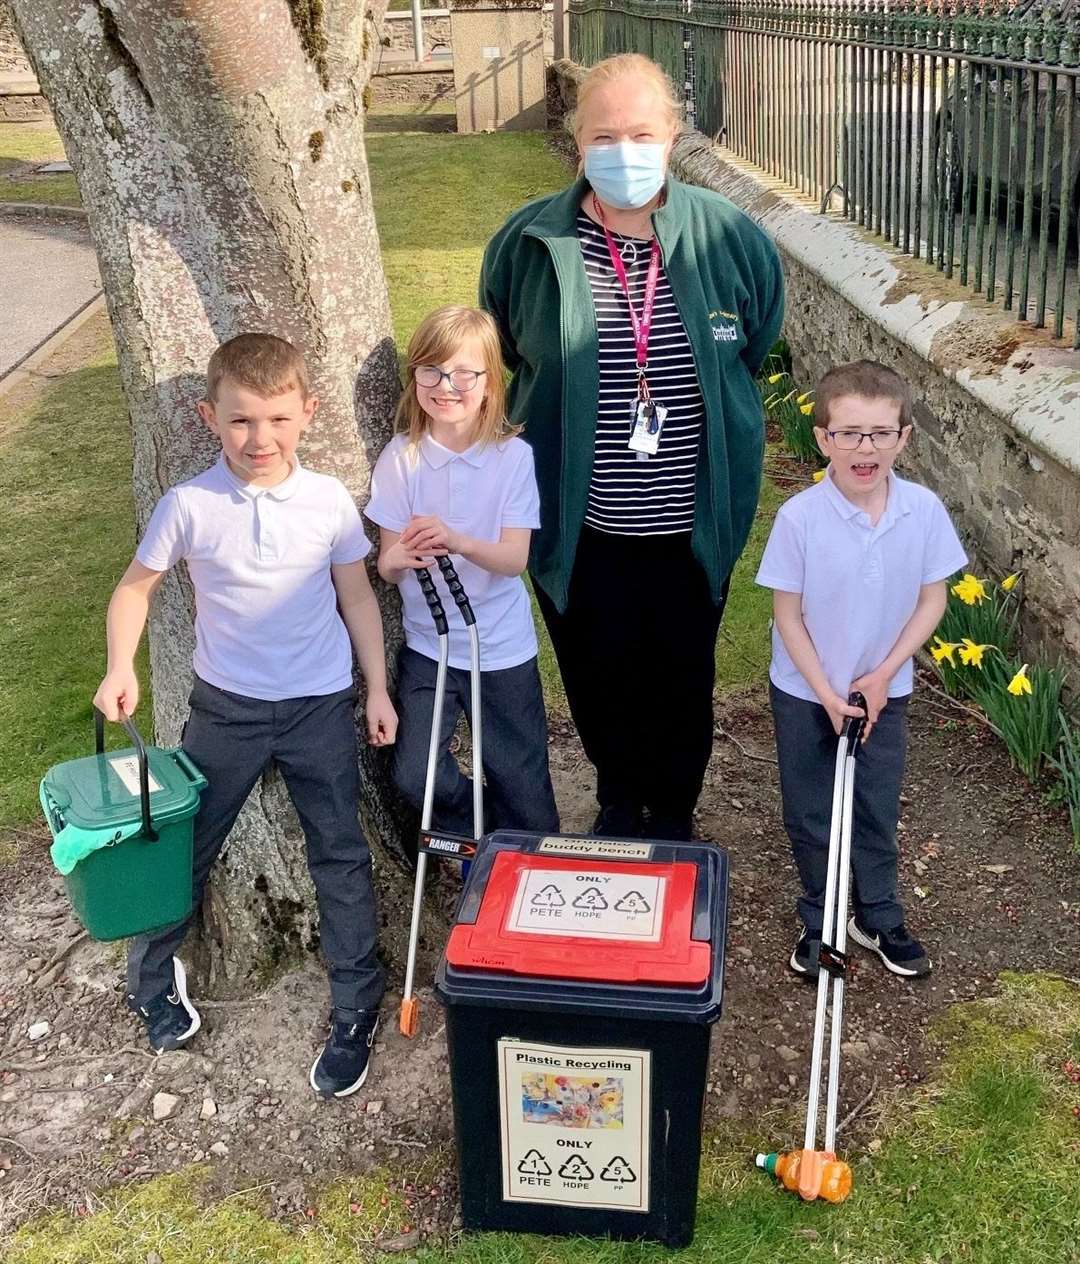 Getting ready to do a spot of award-winning litter picking are (from left) Lewis, Amber, Milne's Primary eco lead Pip Wheeler and John. Picture: Milne's Primary